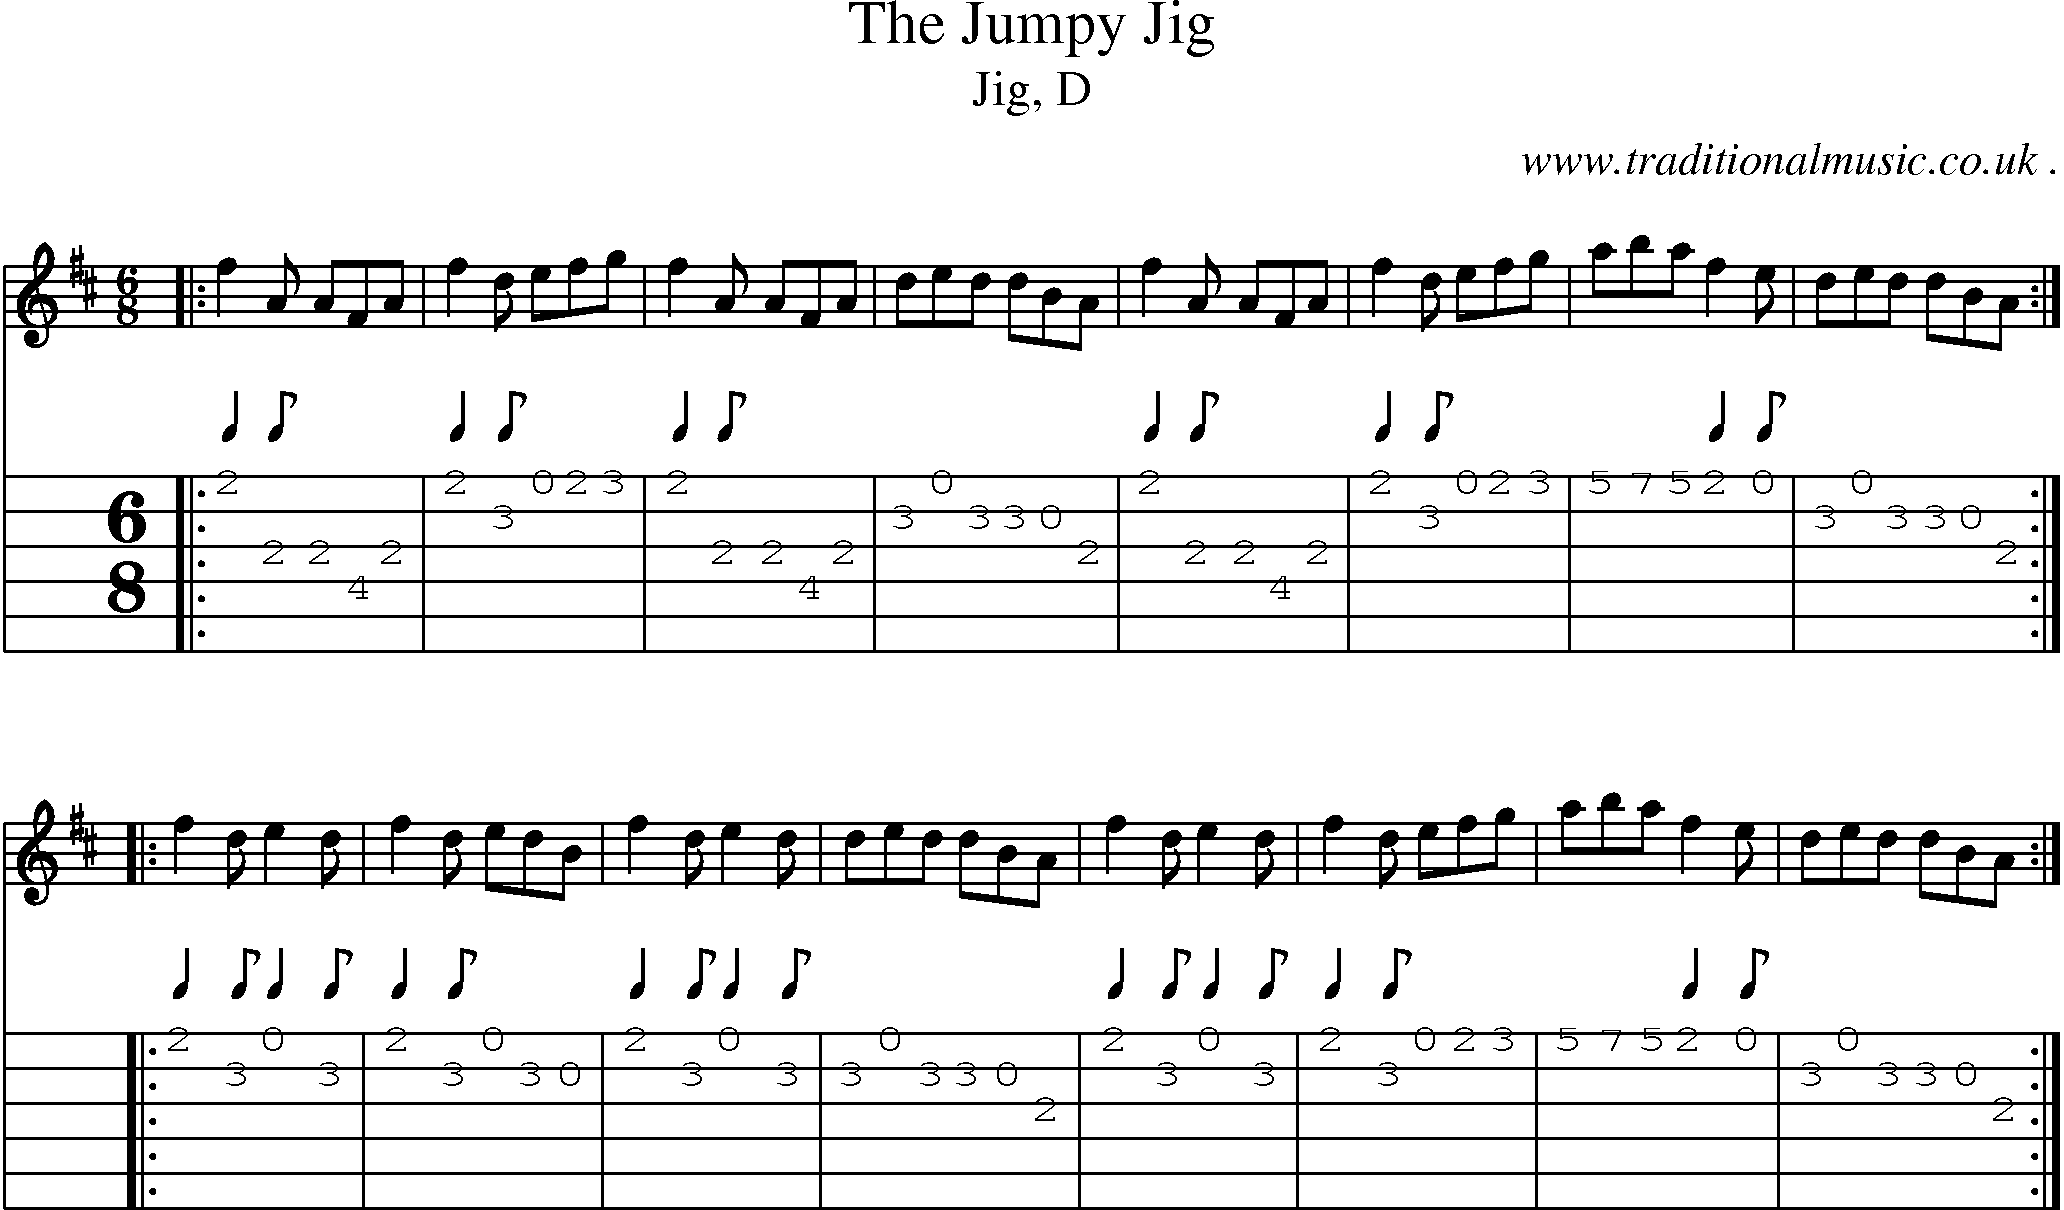 Sheet-music  score, Chords and Guitar Tabs for The Jumpy Jig